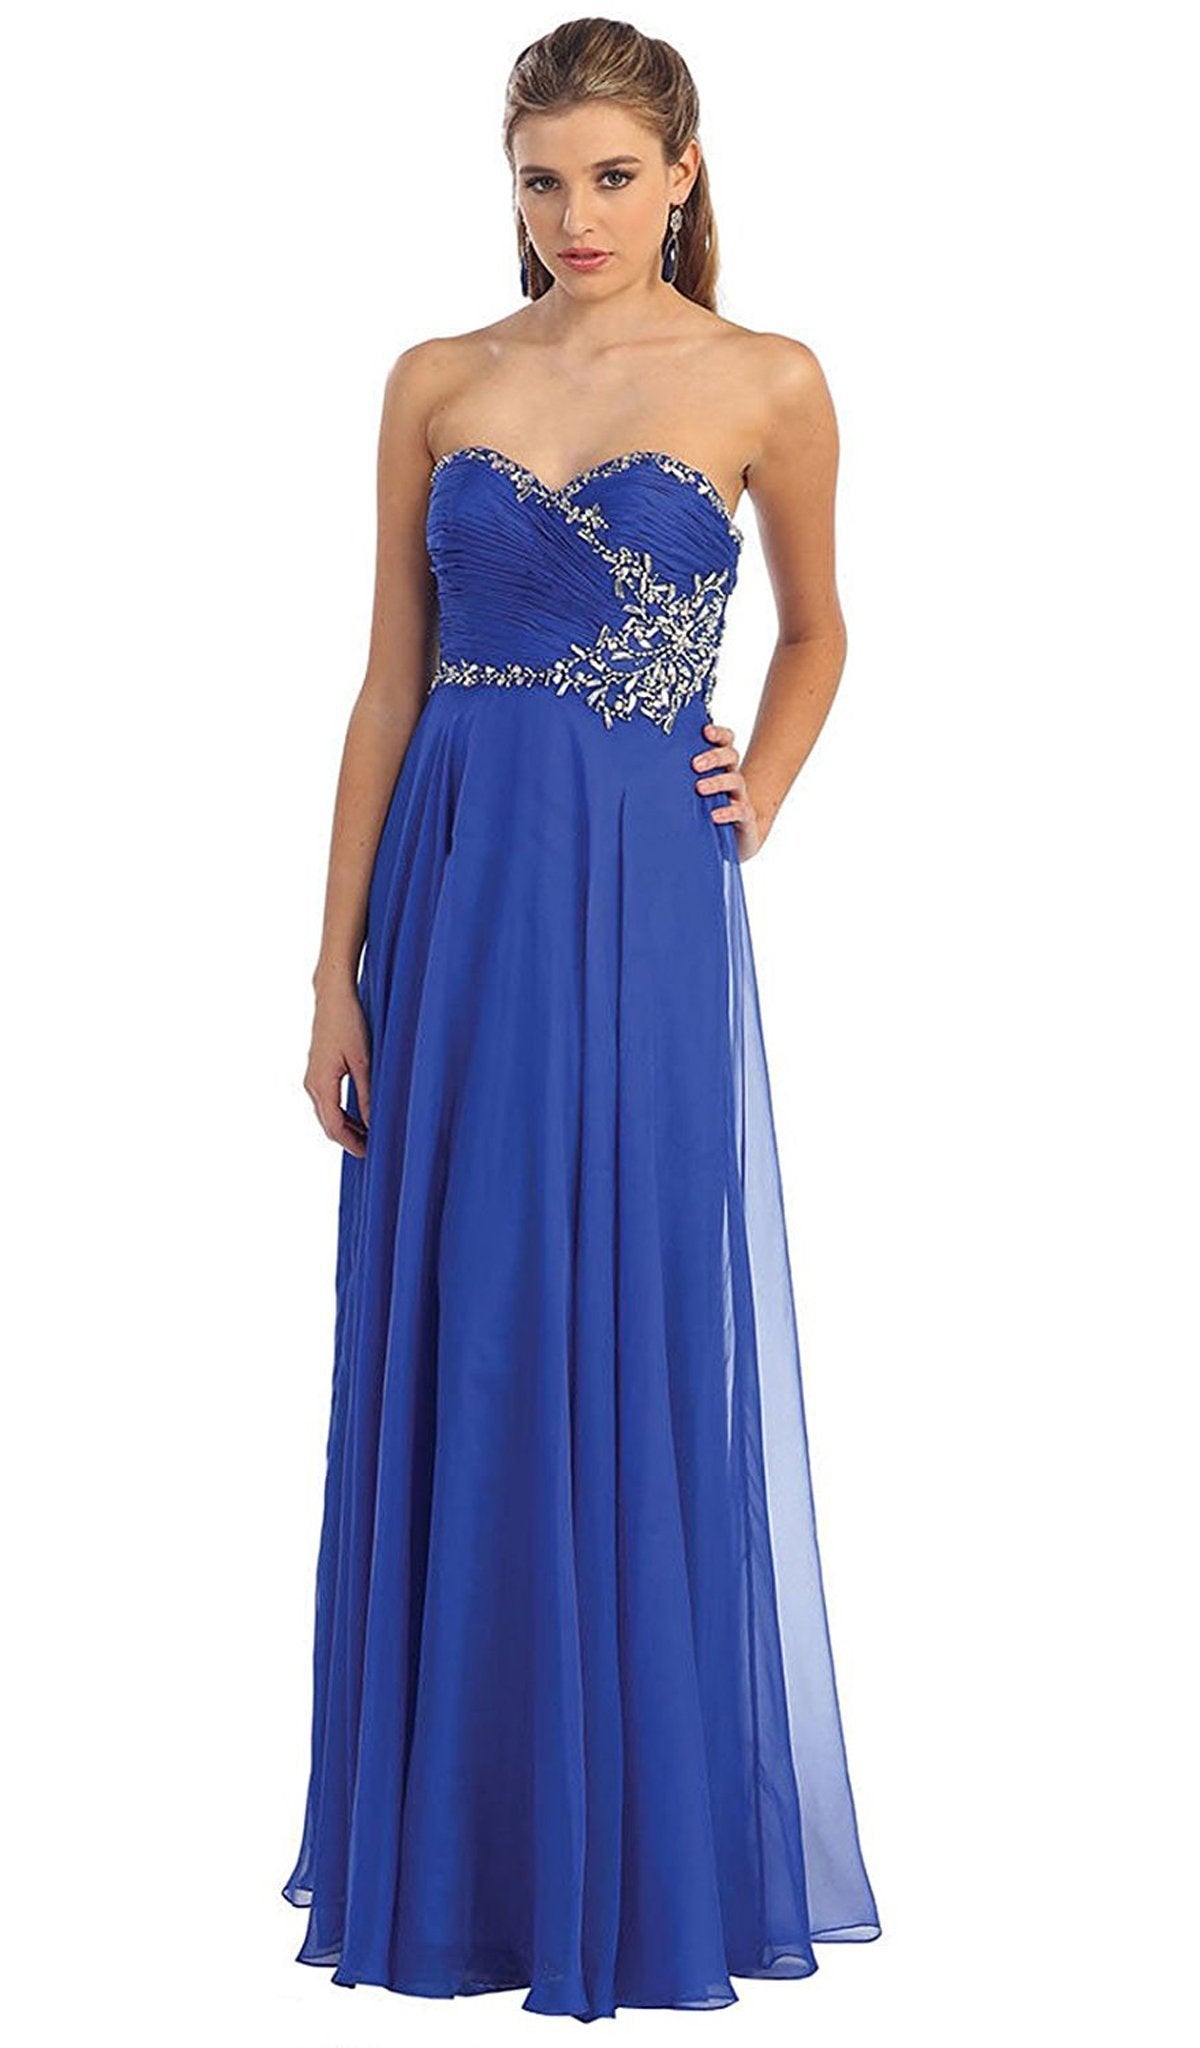 May Queen - MQ981 Embellished Ruched Sweetheart Chiffon Prom Dress In Blue